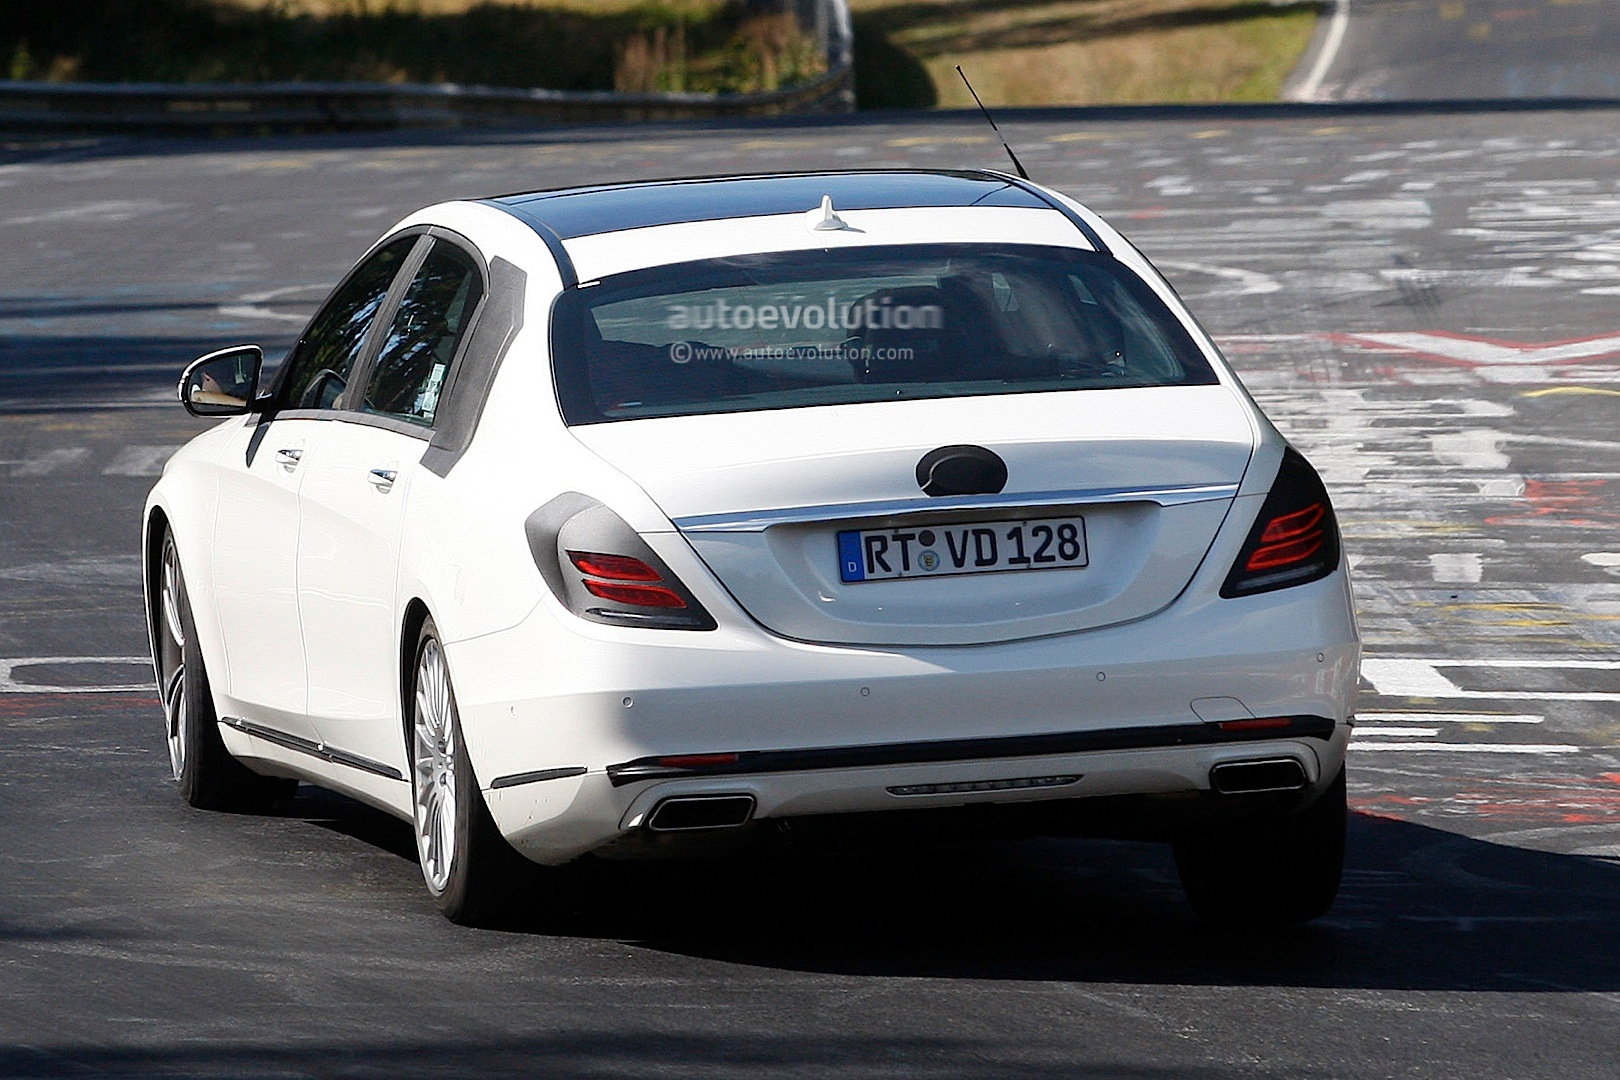 long-wheelbase-s-class-wafting-on-the-nurburgring-photo-gallery_5